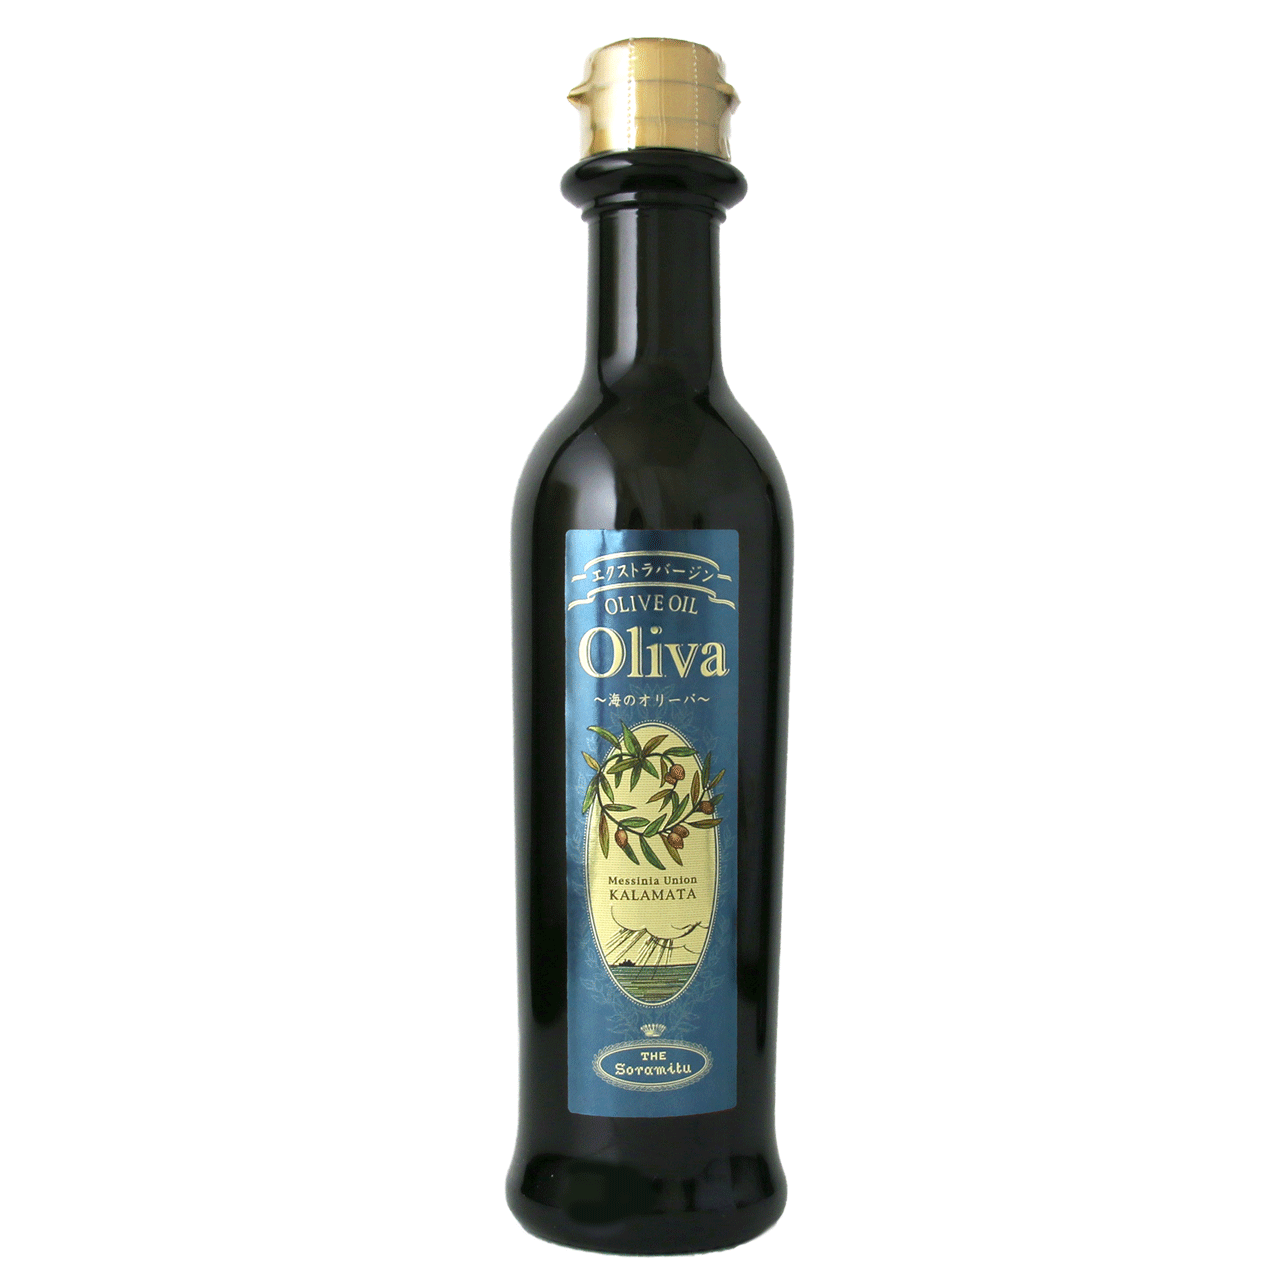 Extra Virgin Olive Oil - EX Sea Oliva - Refreshing flavor and herby aftertaste 250ml